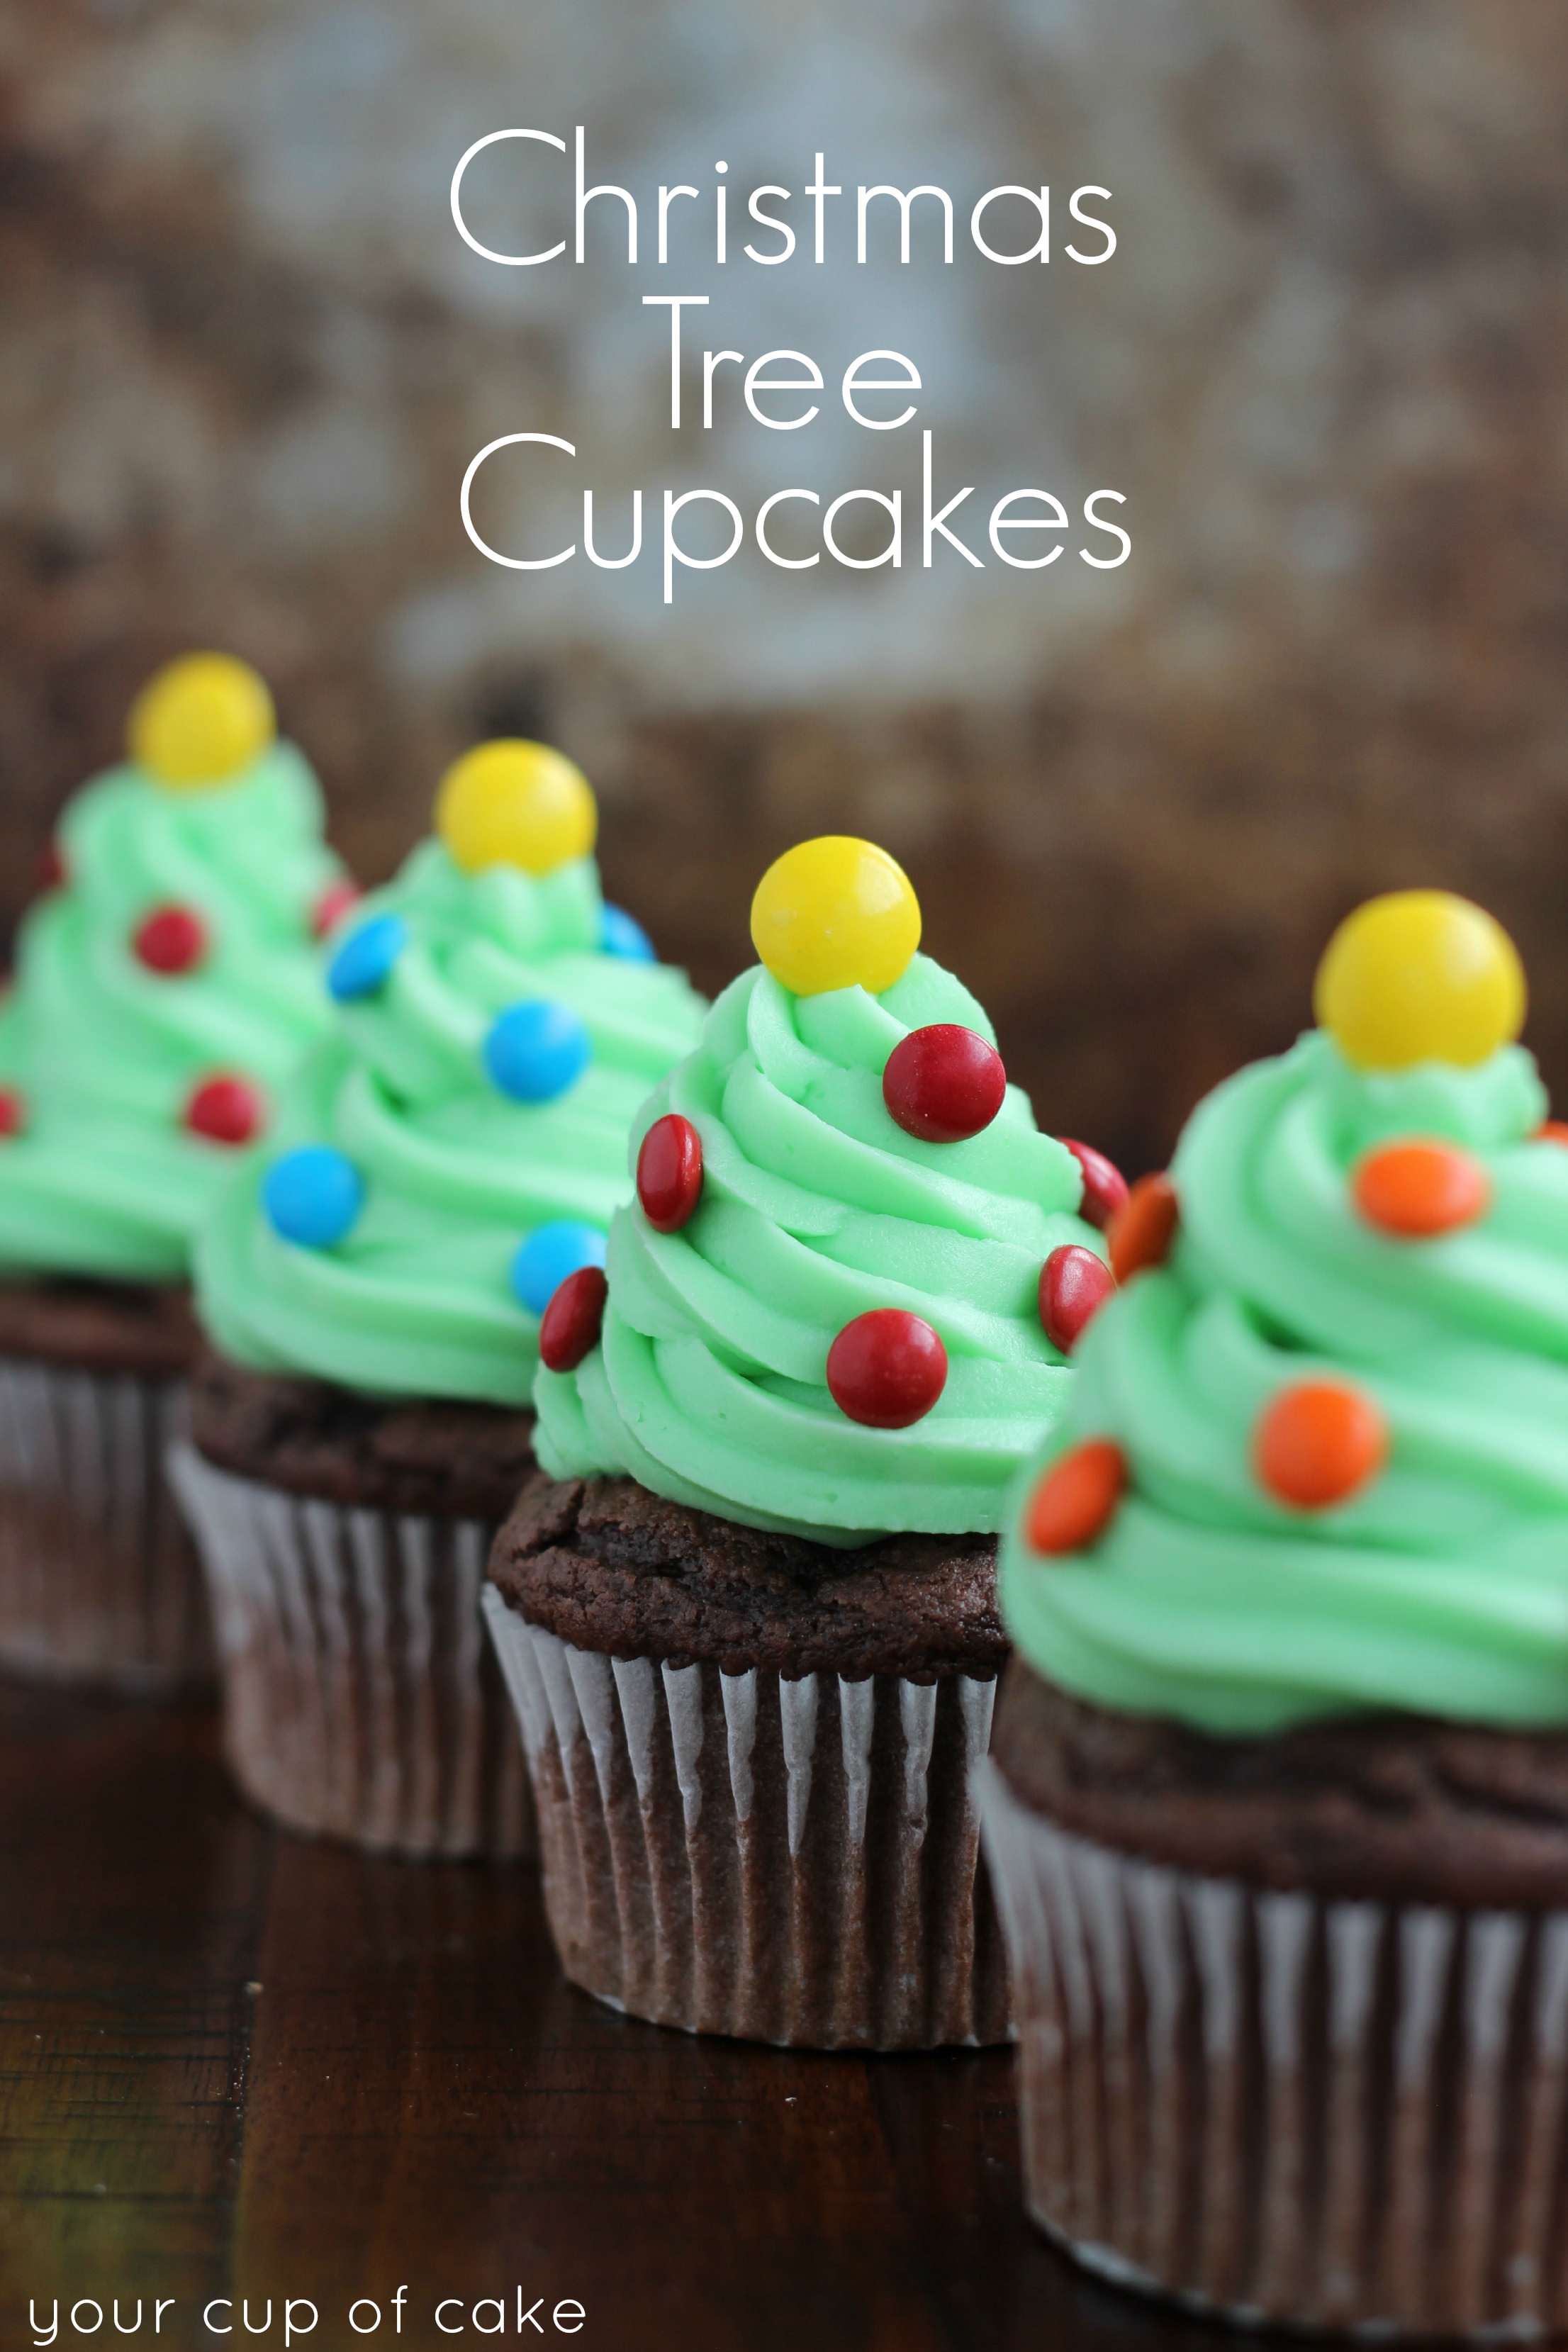 Easy Cupcake Decorating for Christmas - Your Cup of Cake